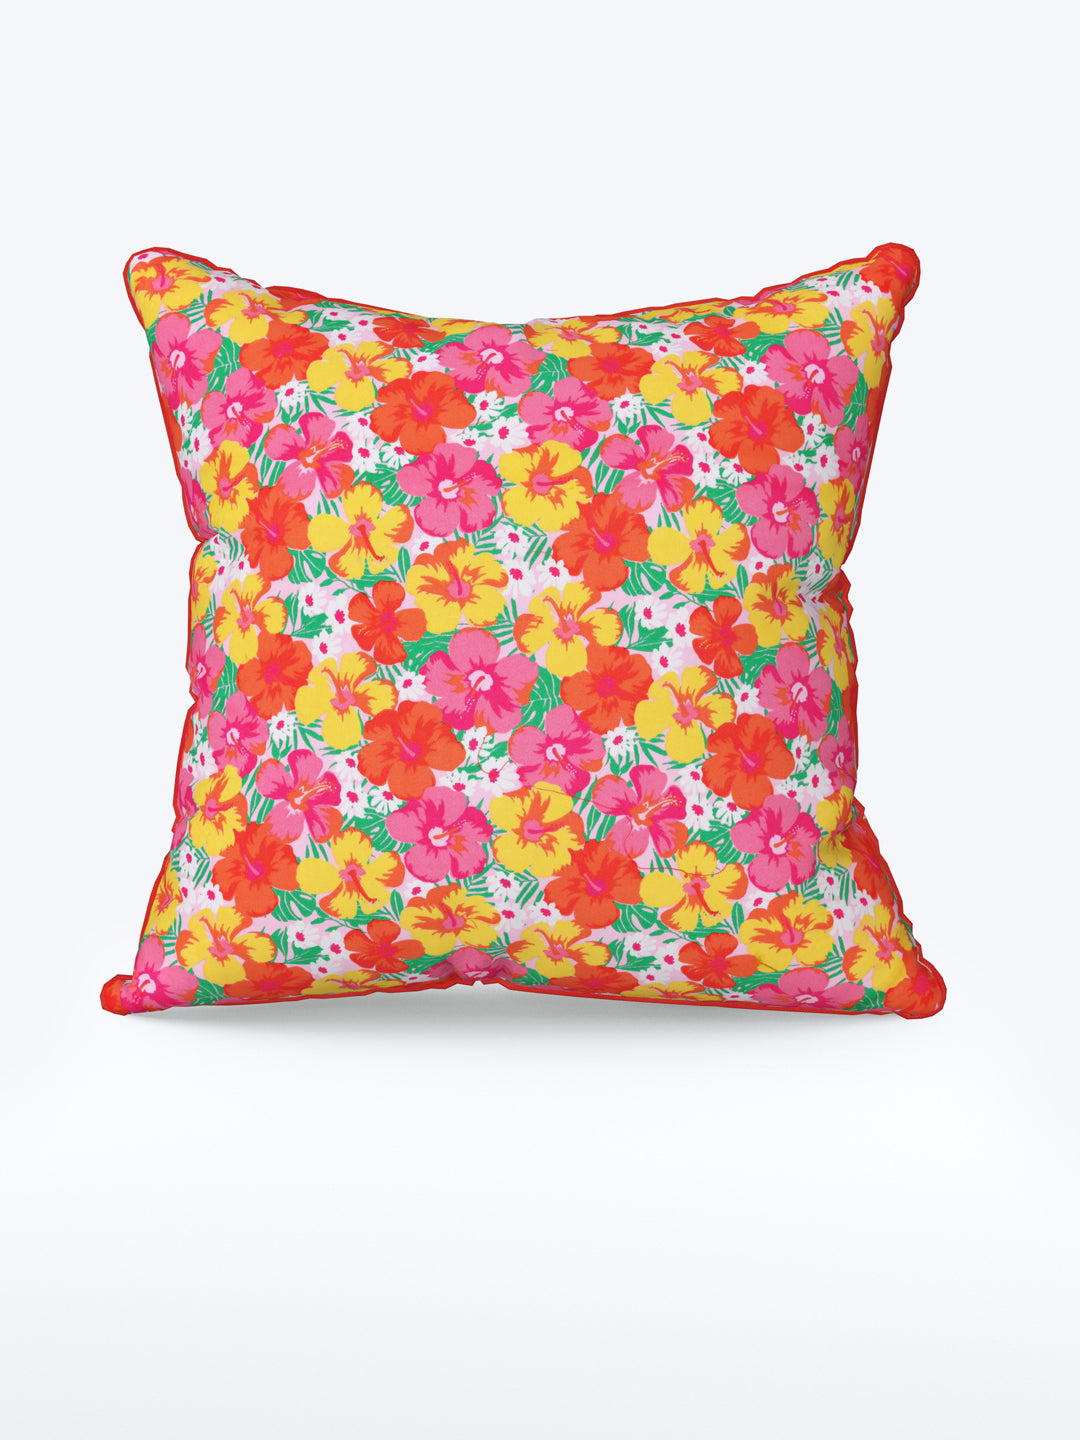 Cushion Covers Set of 2; Multicolor Flowers